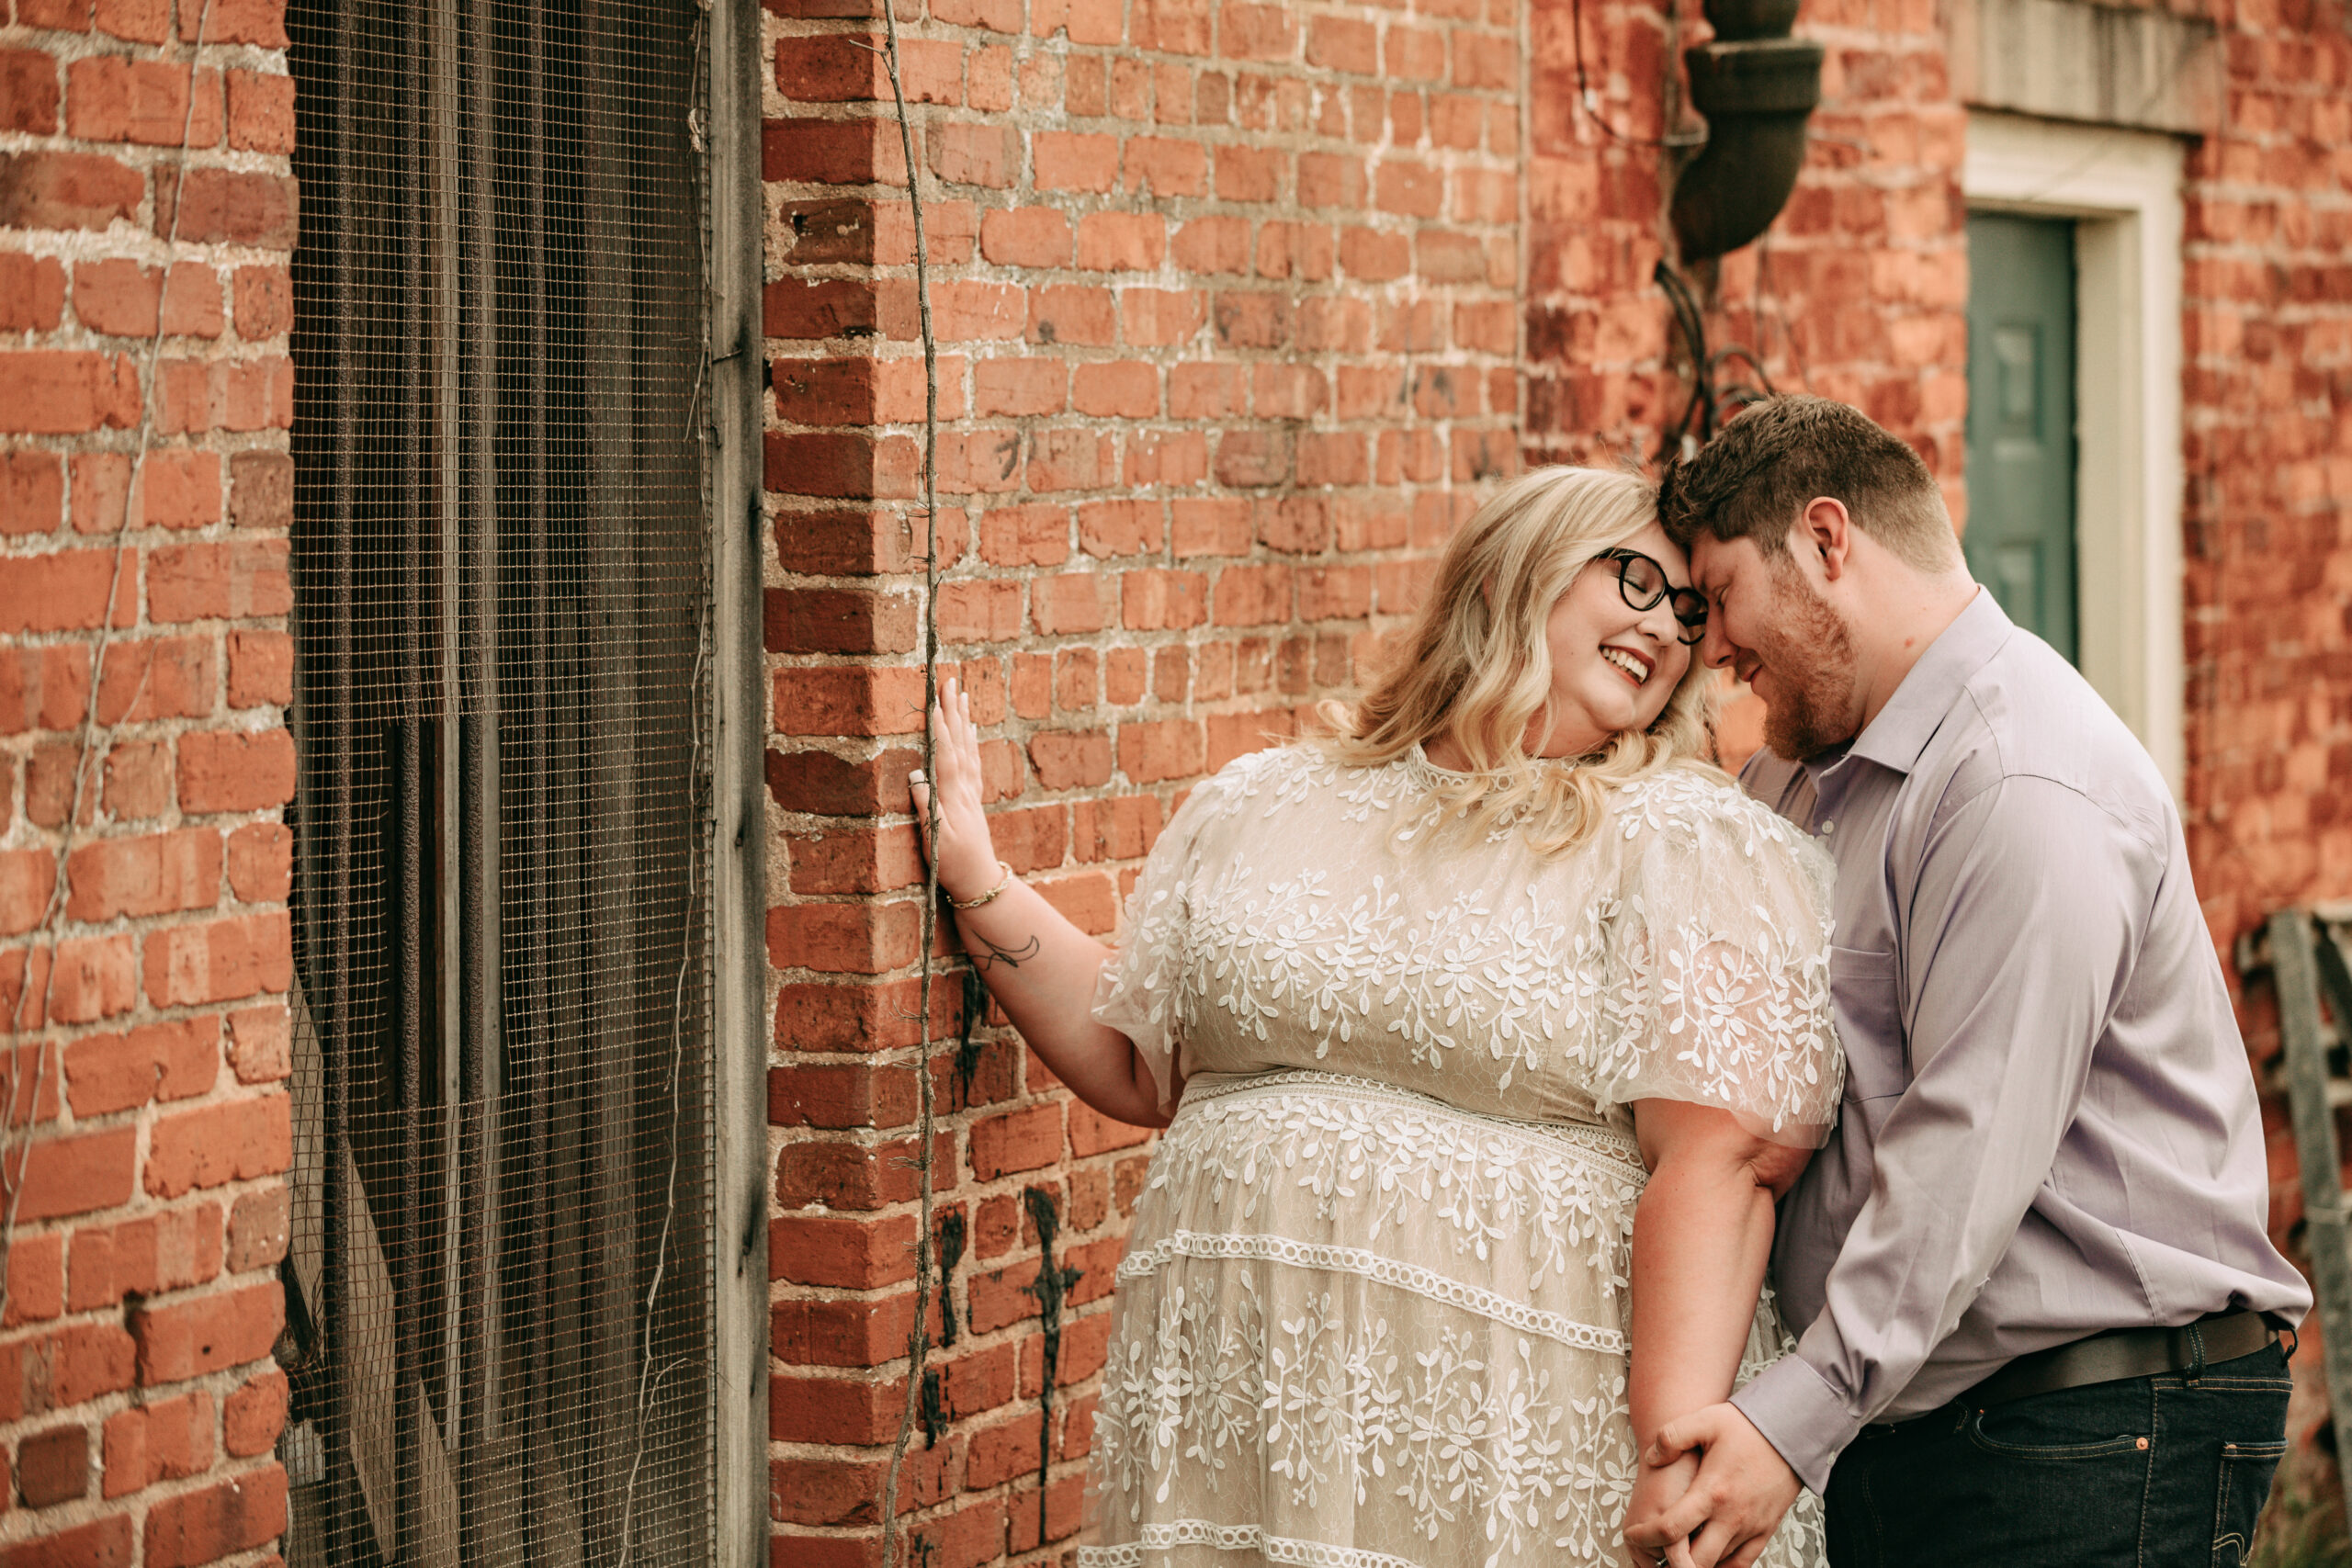 Capture the charm and romance of a small town engagement session